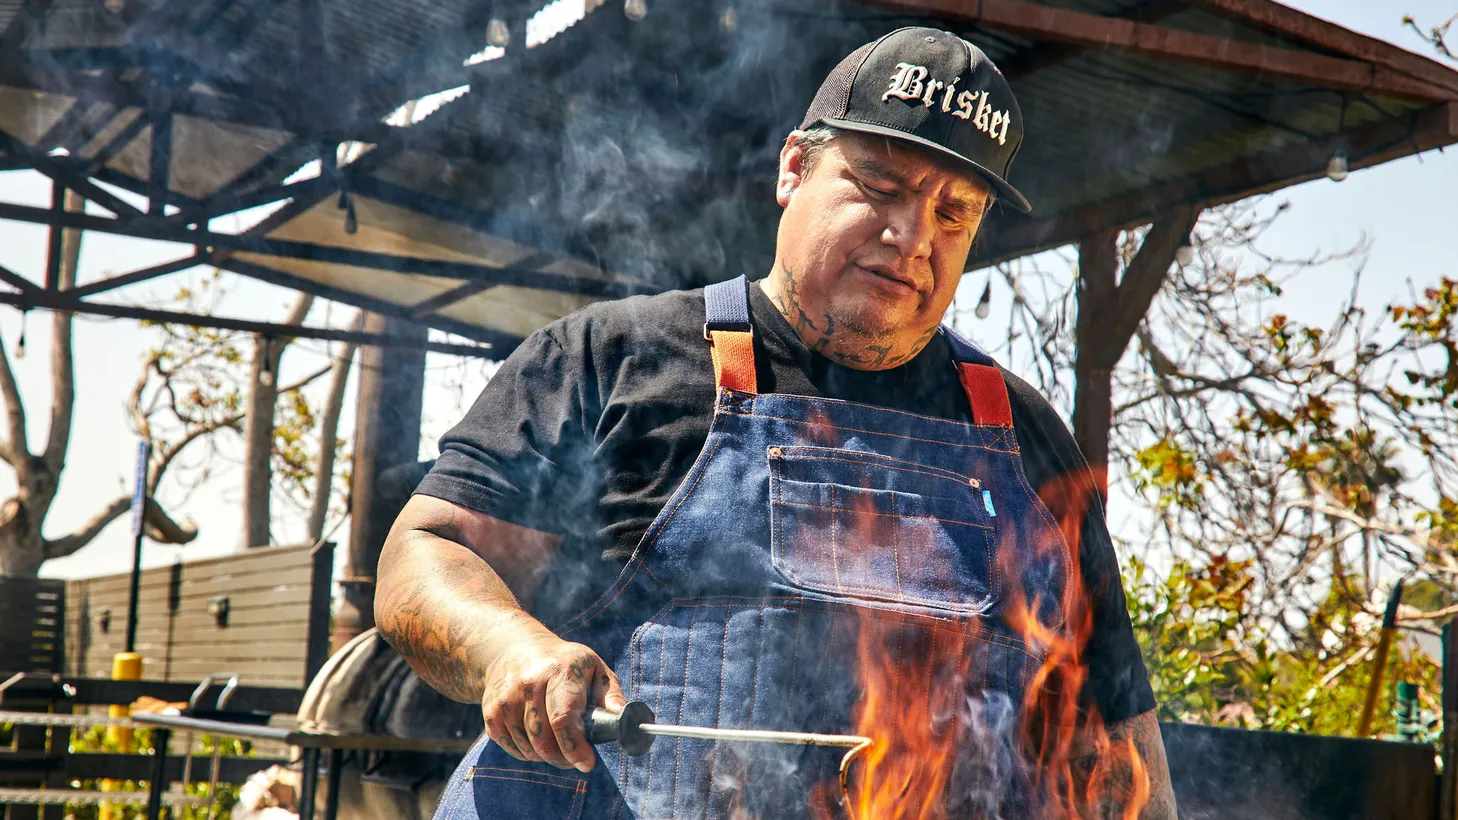 Pitmaster Daniel Castillo of Heritage Barbecue was serving neighbors out of his backyard in Garden Grove before traveling to Texas to perfect his craft.